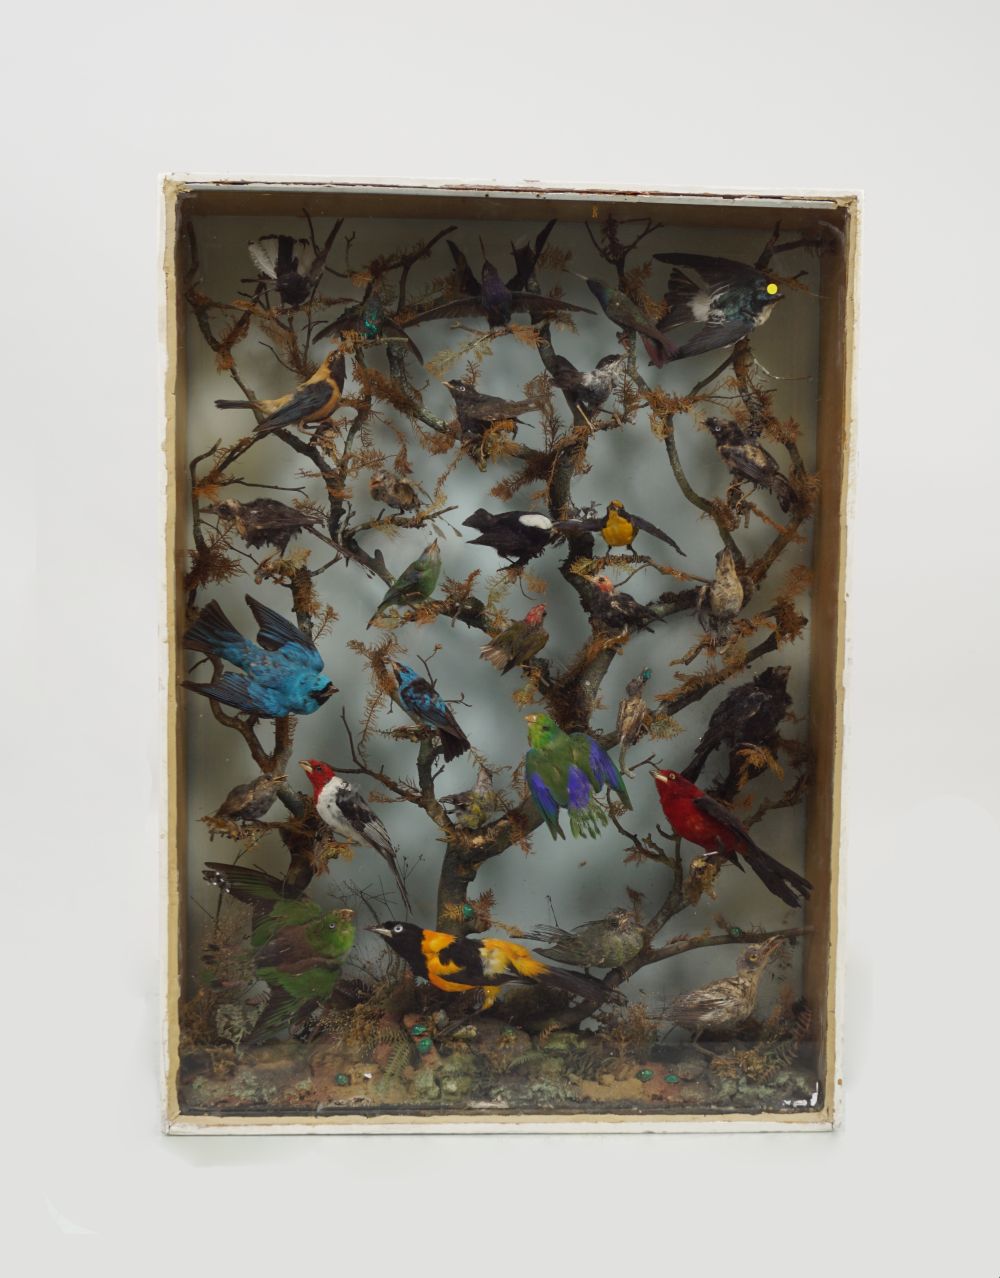 TAXIDERMY: CASE OF EXOTIC COLOURFUL BIRDS